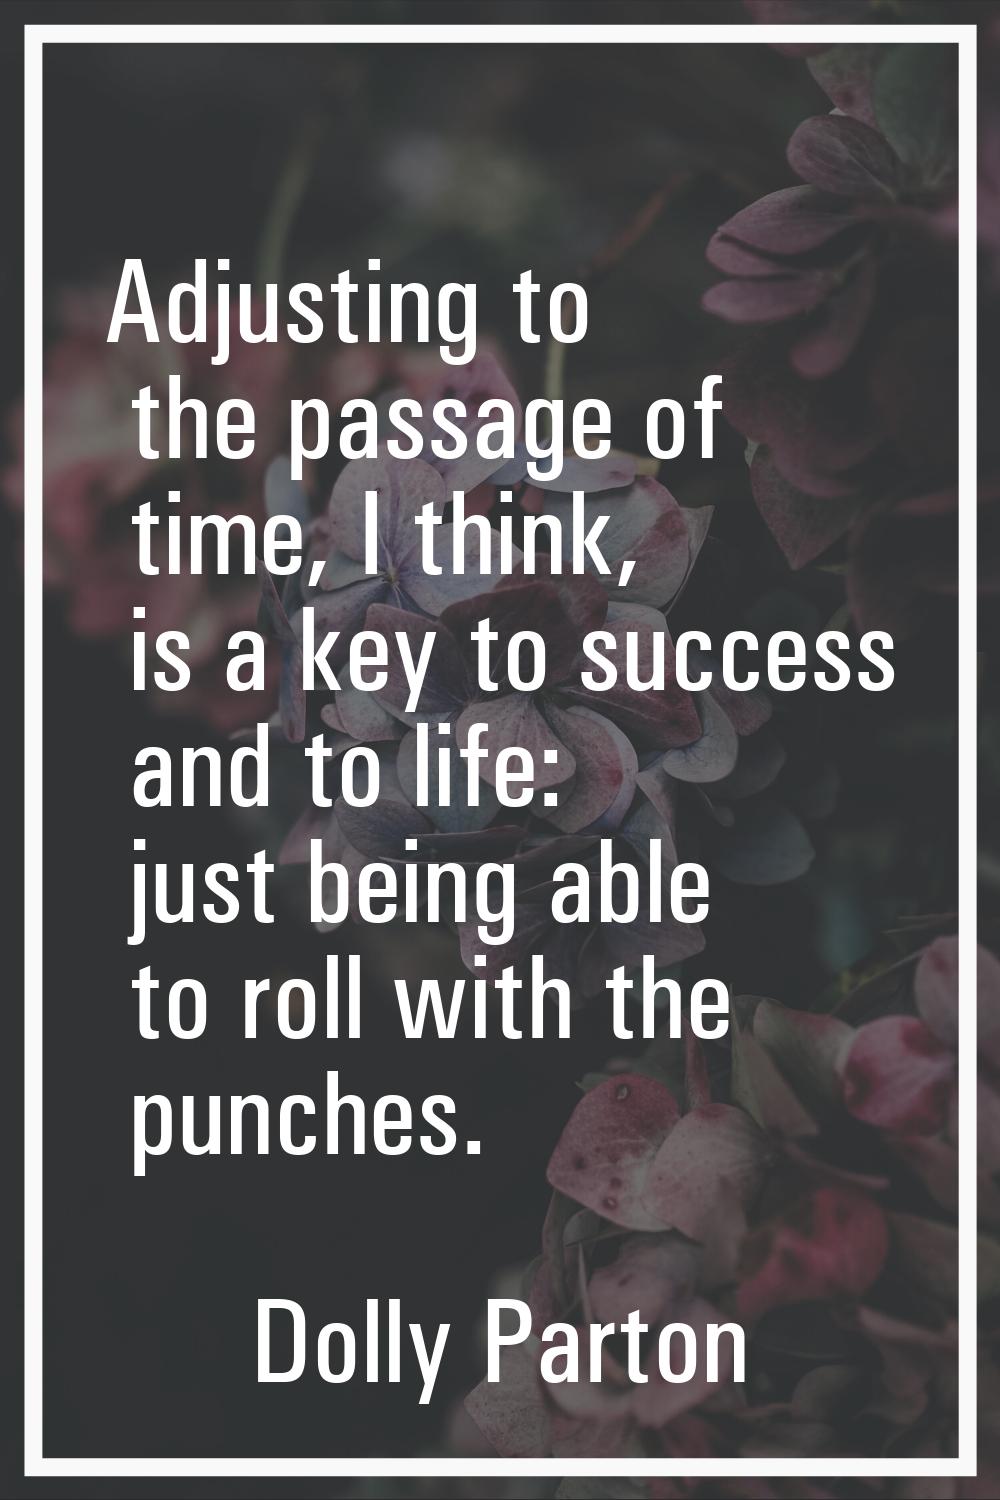 Adjusting to the passage of time, I think, is a key to success and to life: just being able to roll